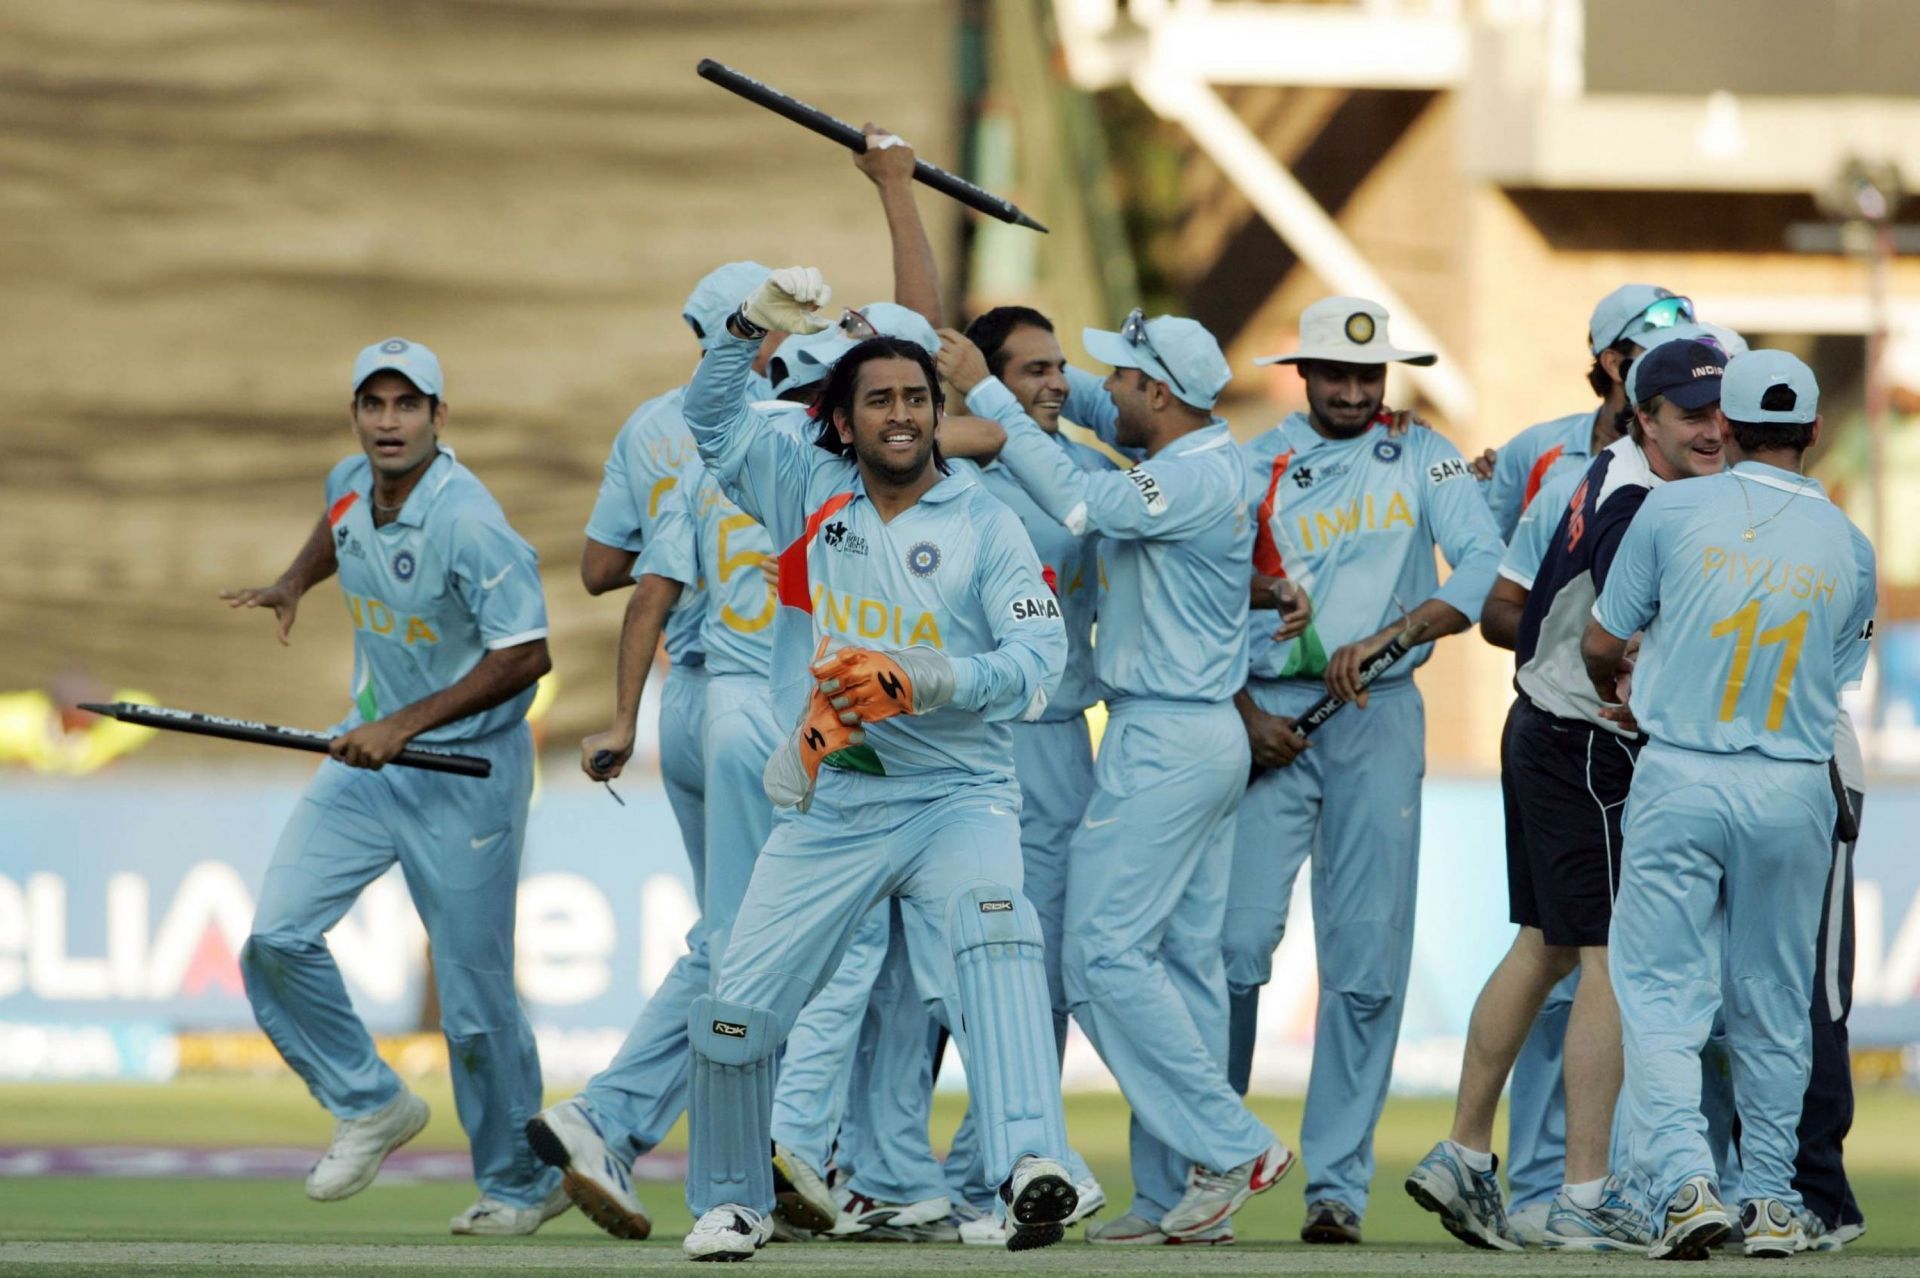 India won the ICC T20 World Cup 2007 under the captaincy of MS Dhoni